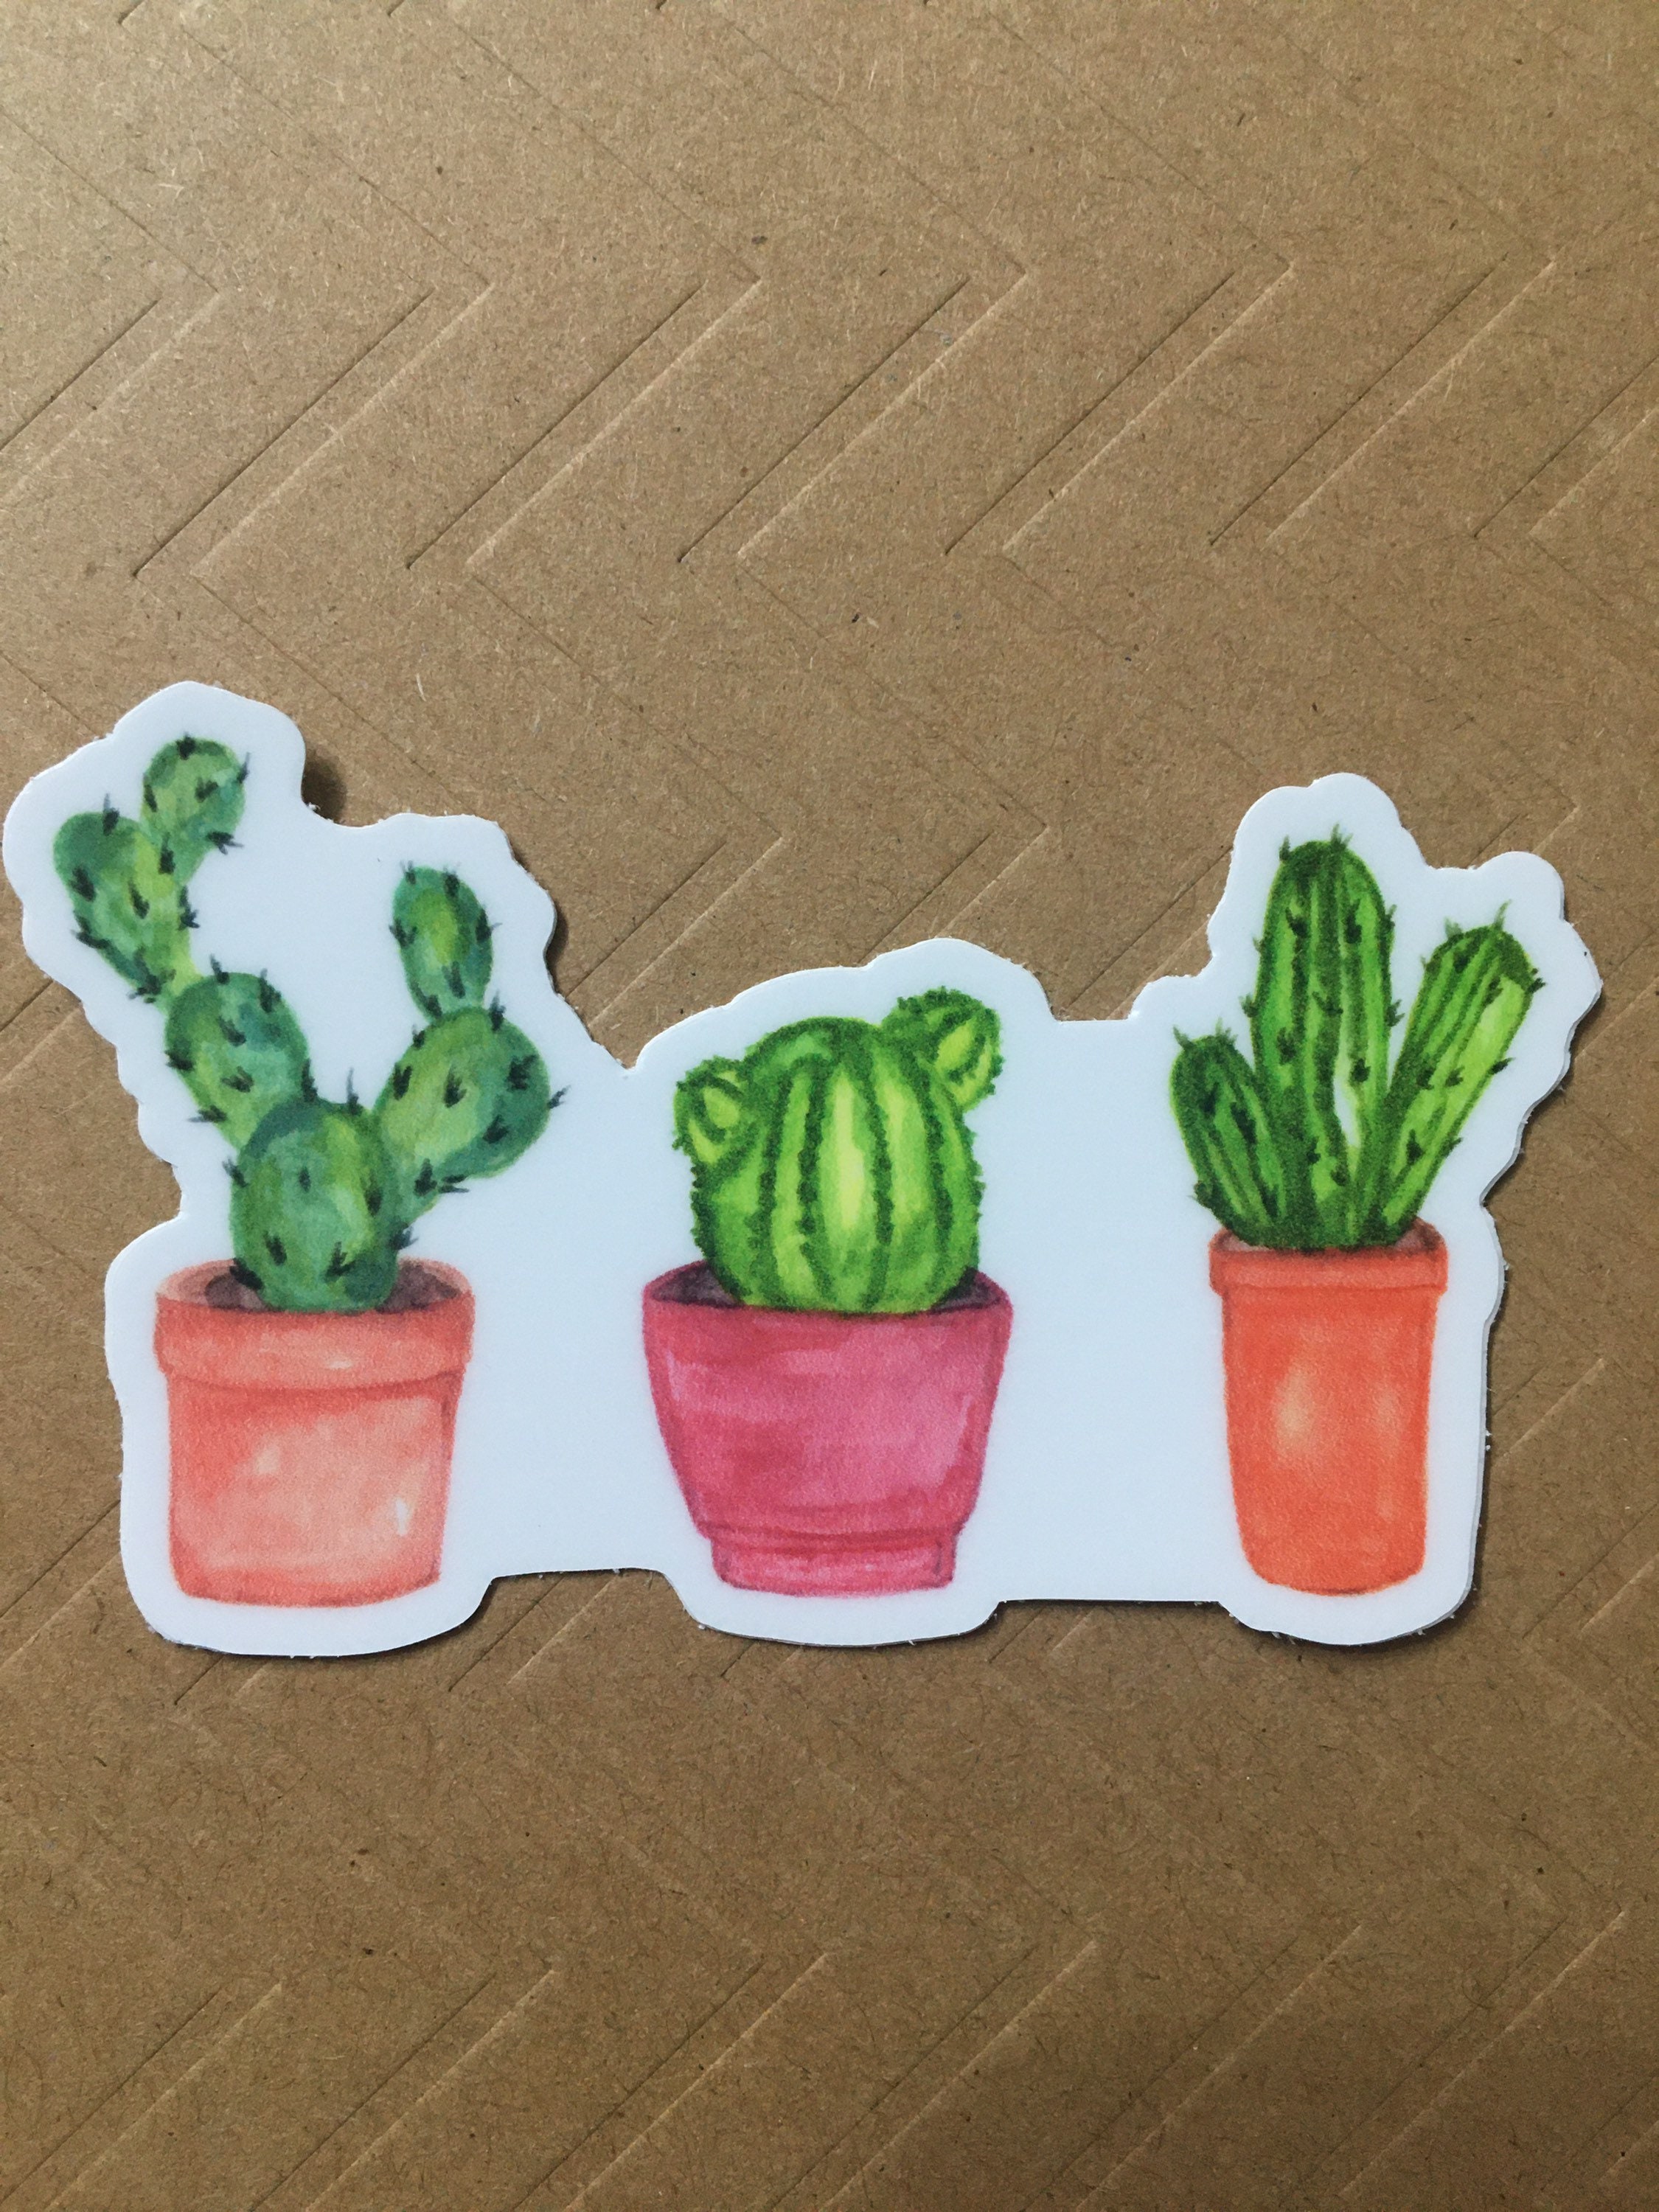 Funny Cactus Watercolor Birthday Cards hope Your | Etsy